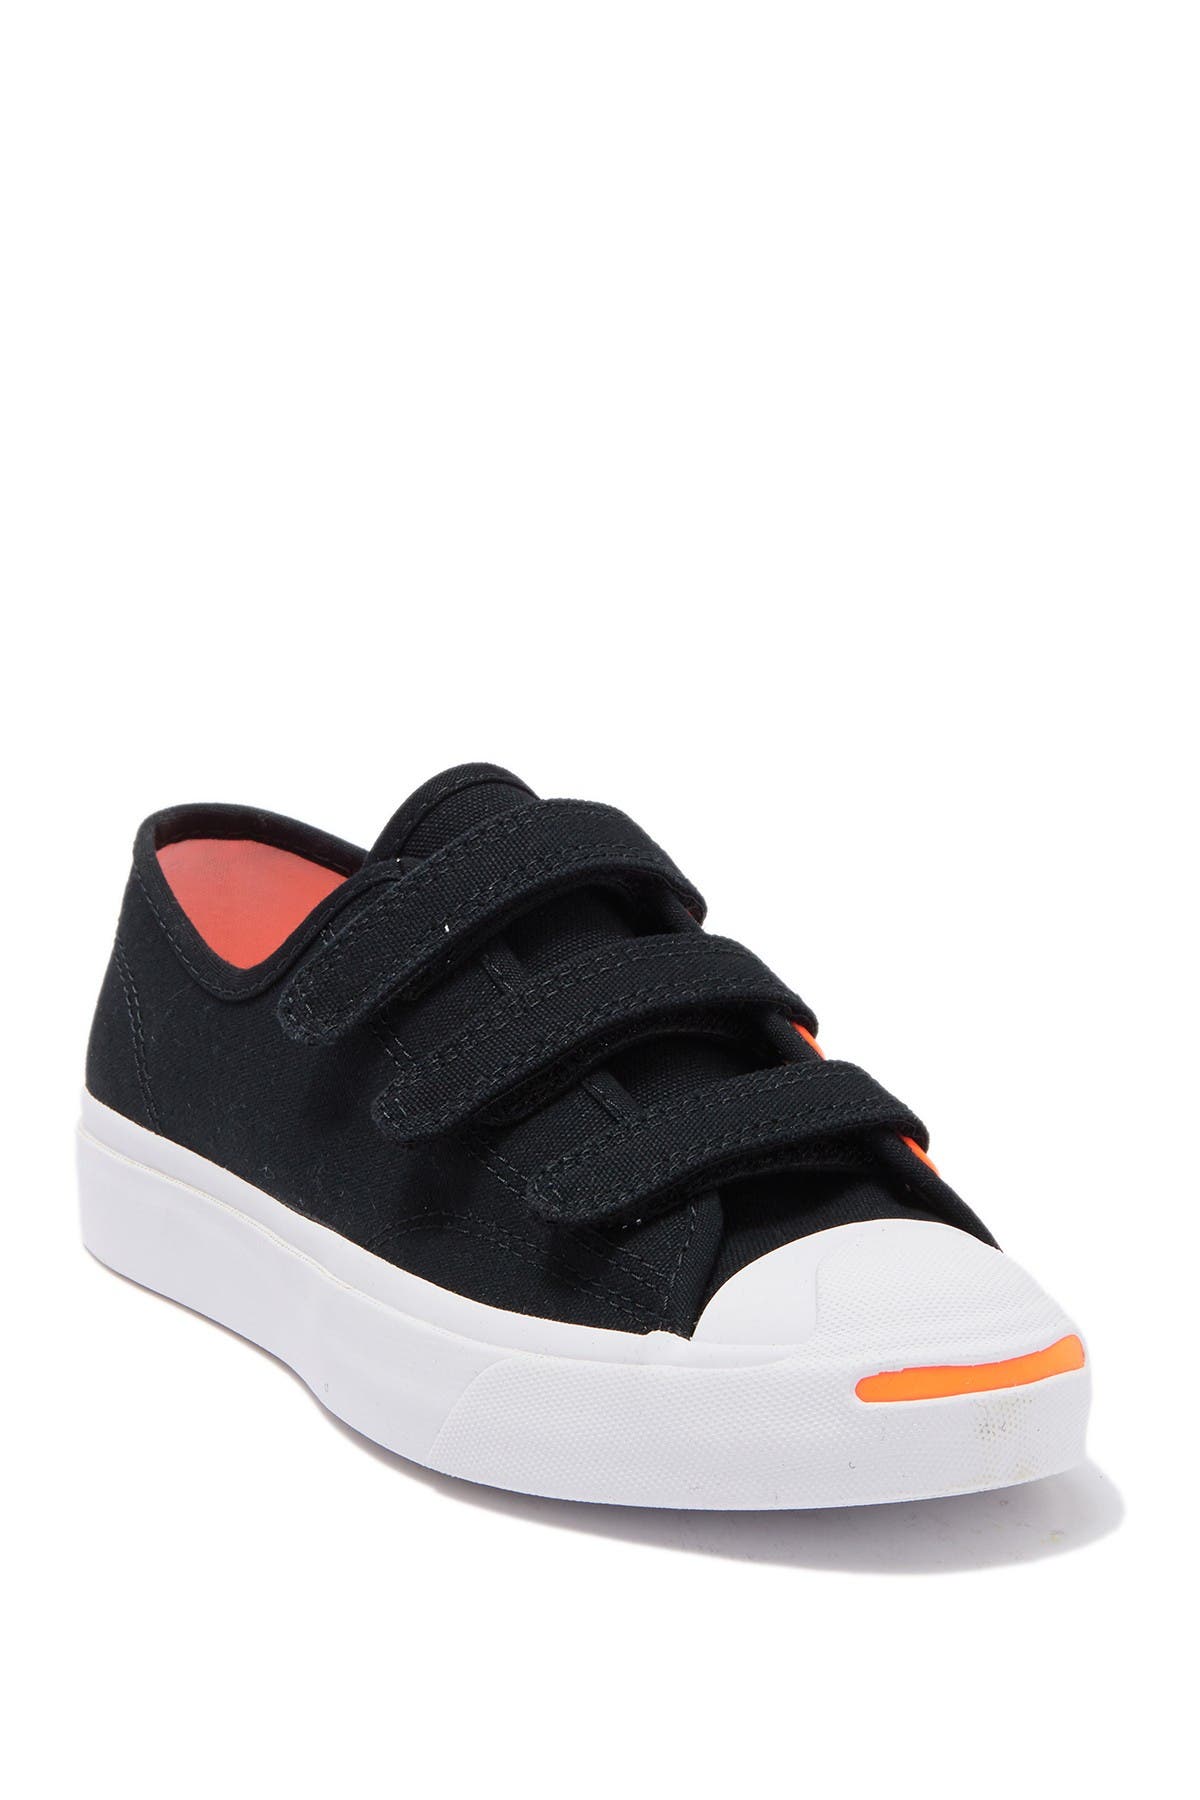 jack purcell hook and loop